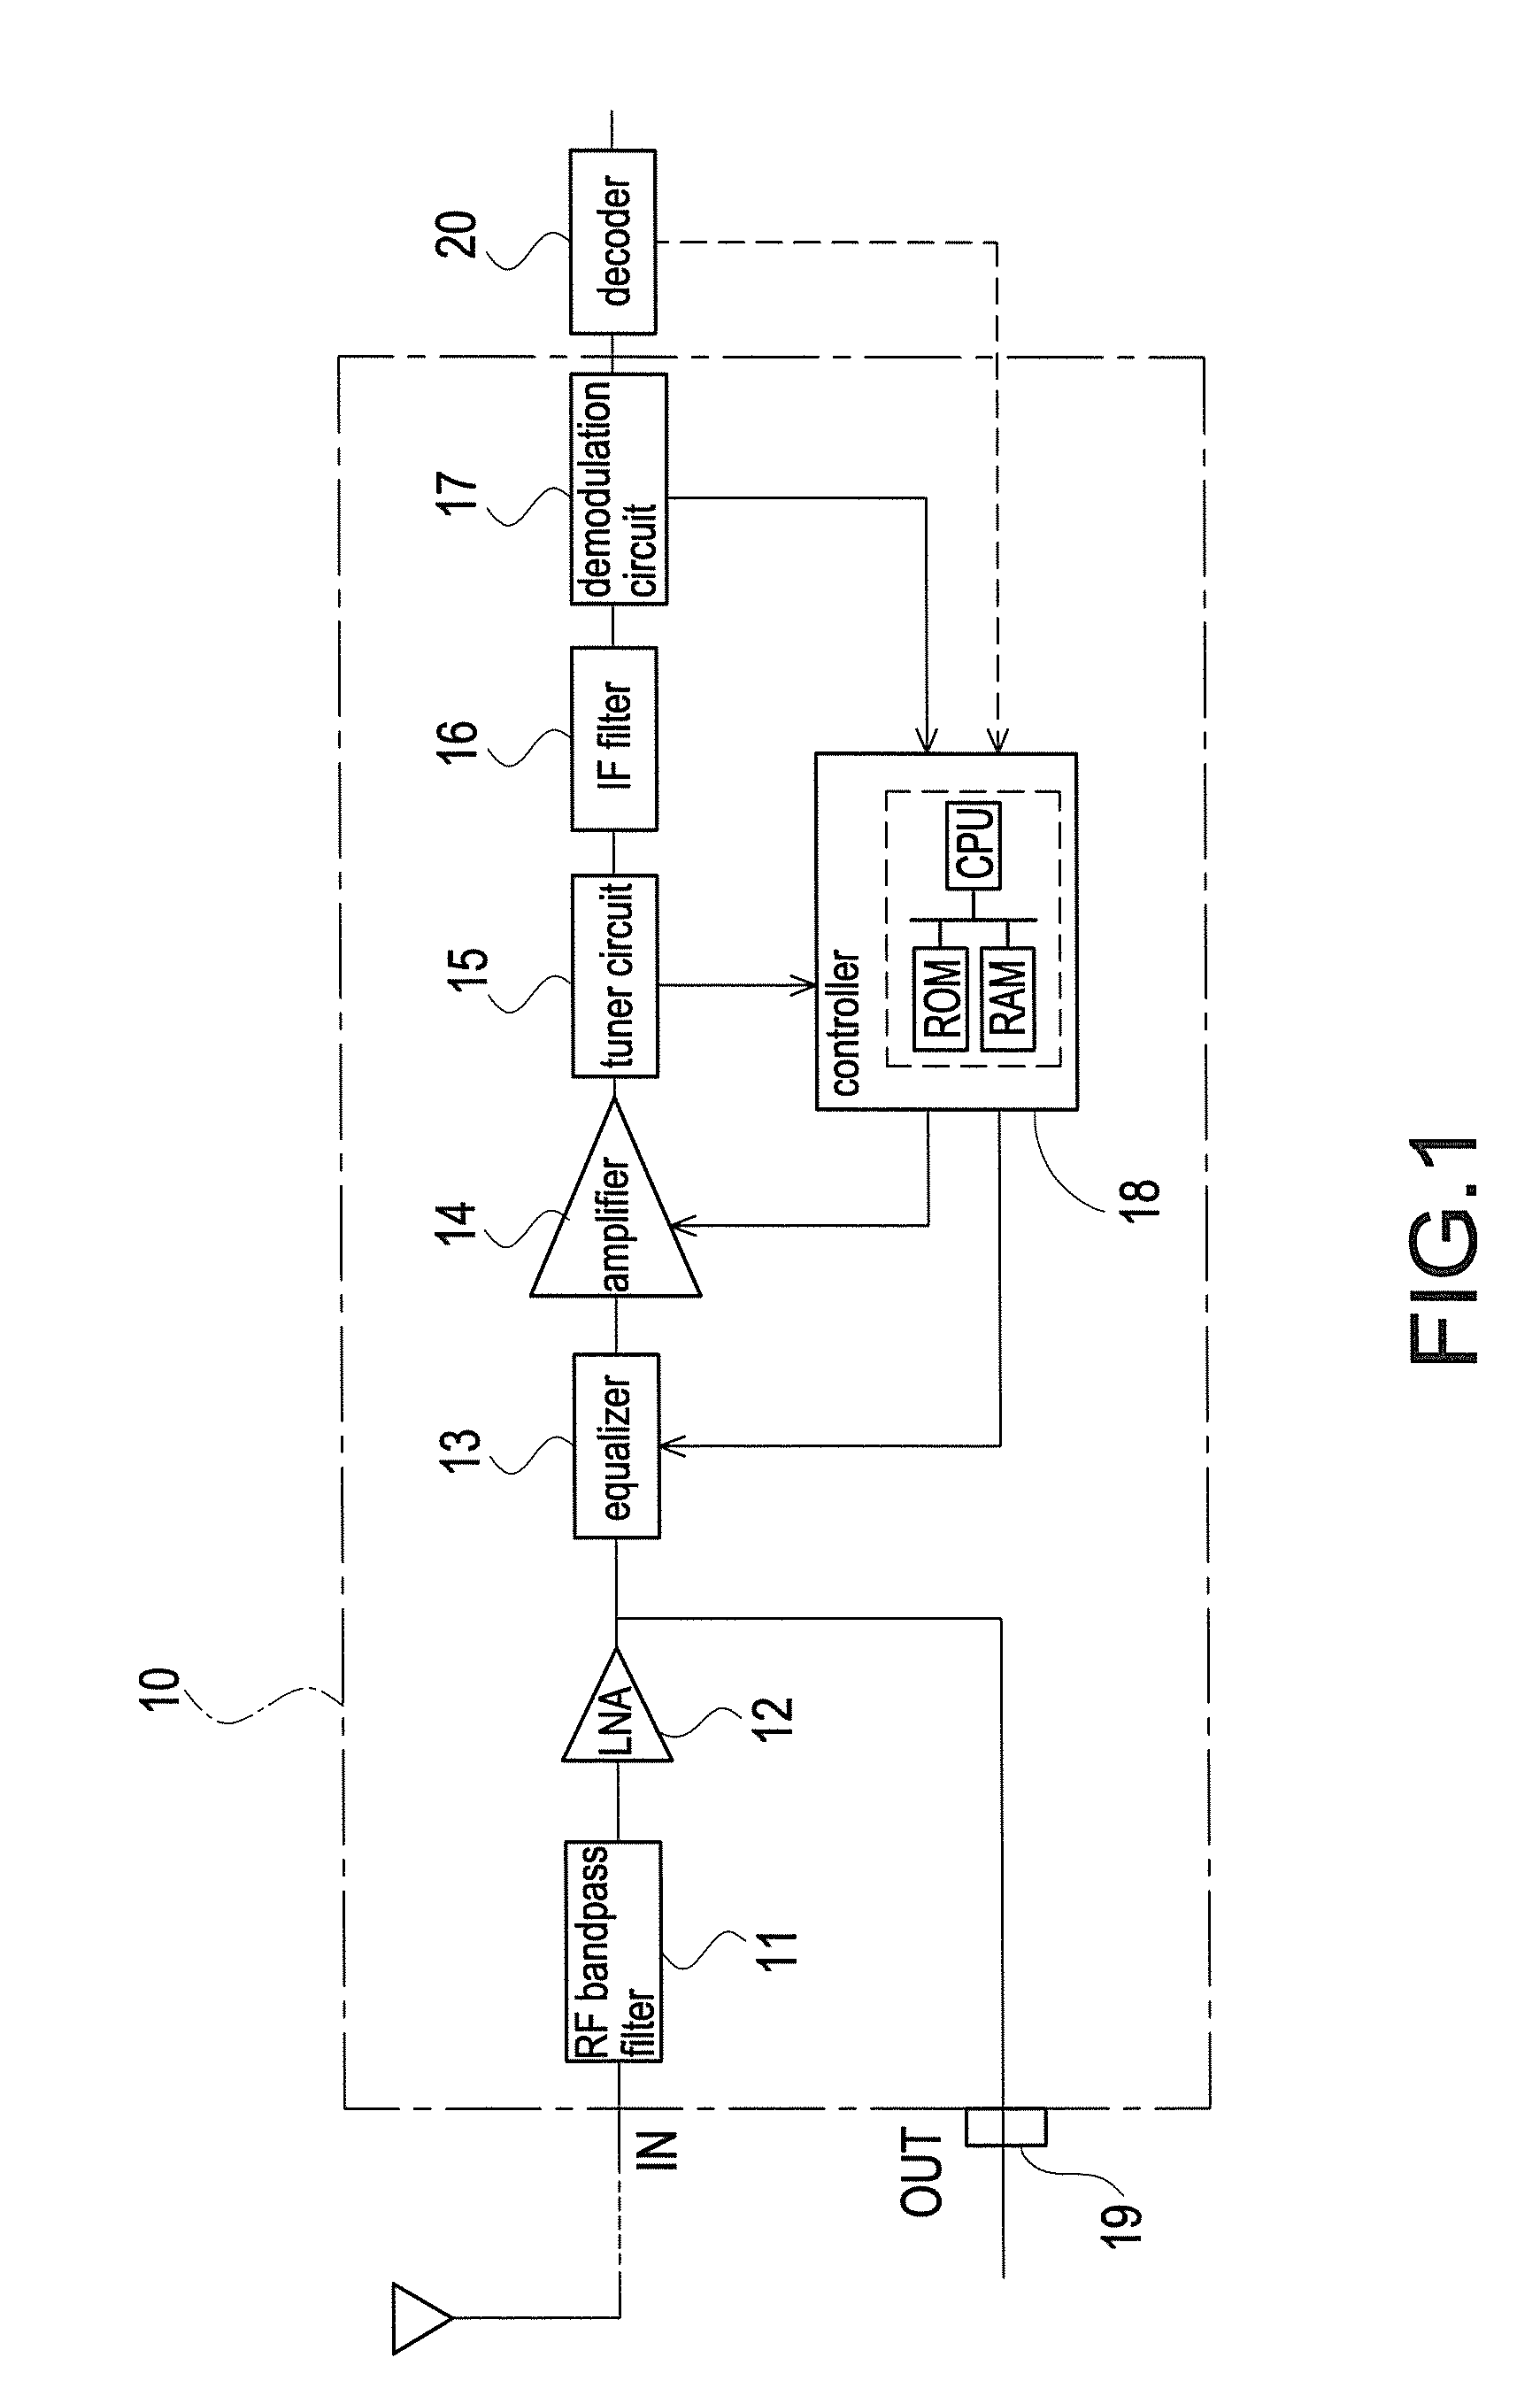 Receiving device